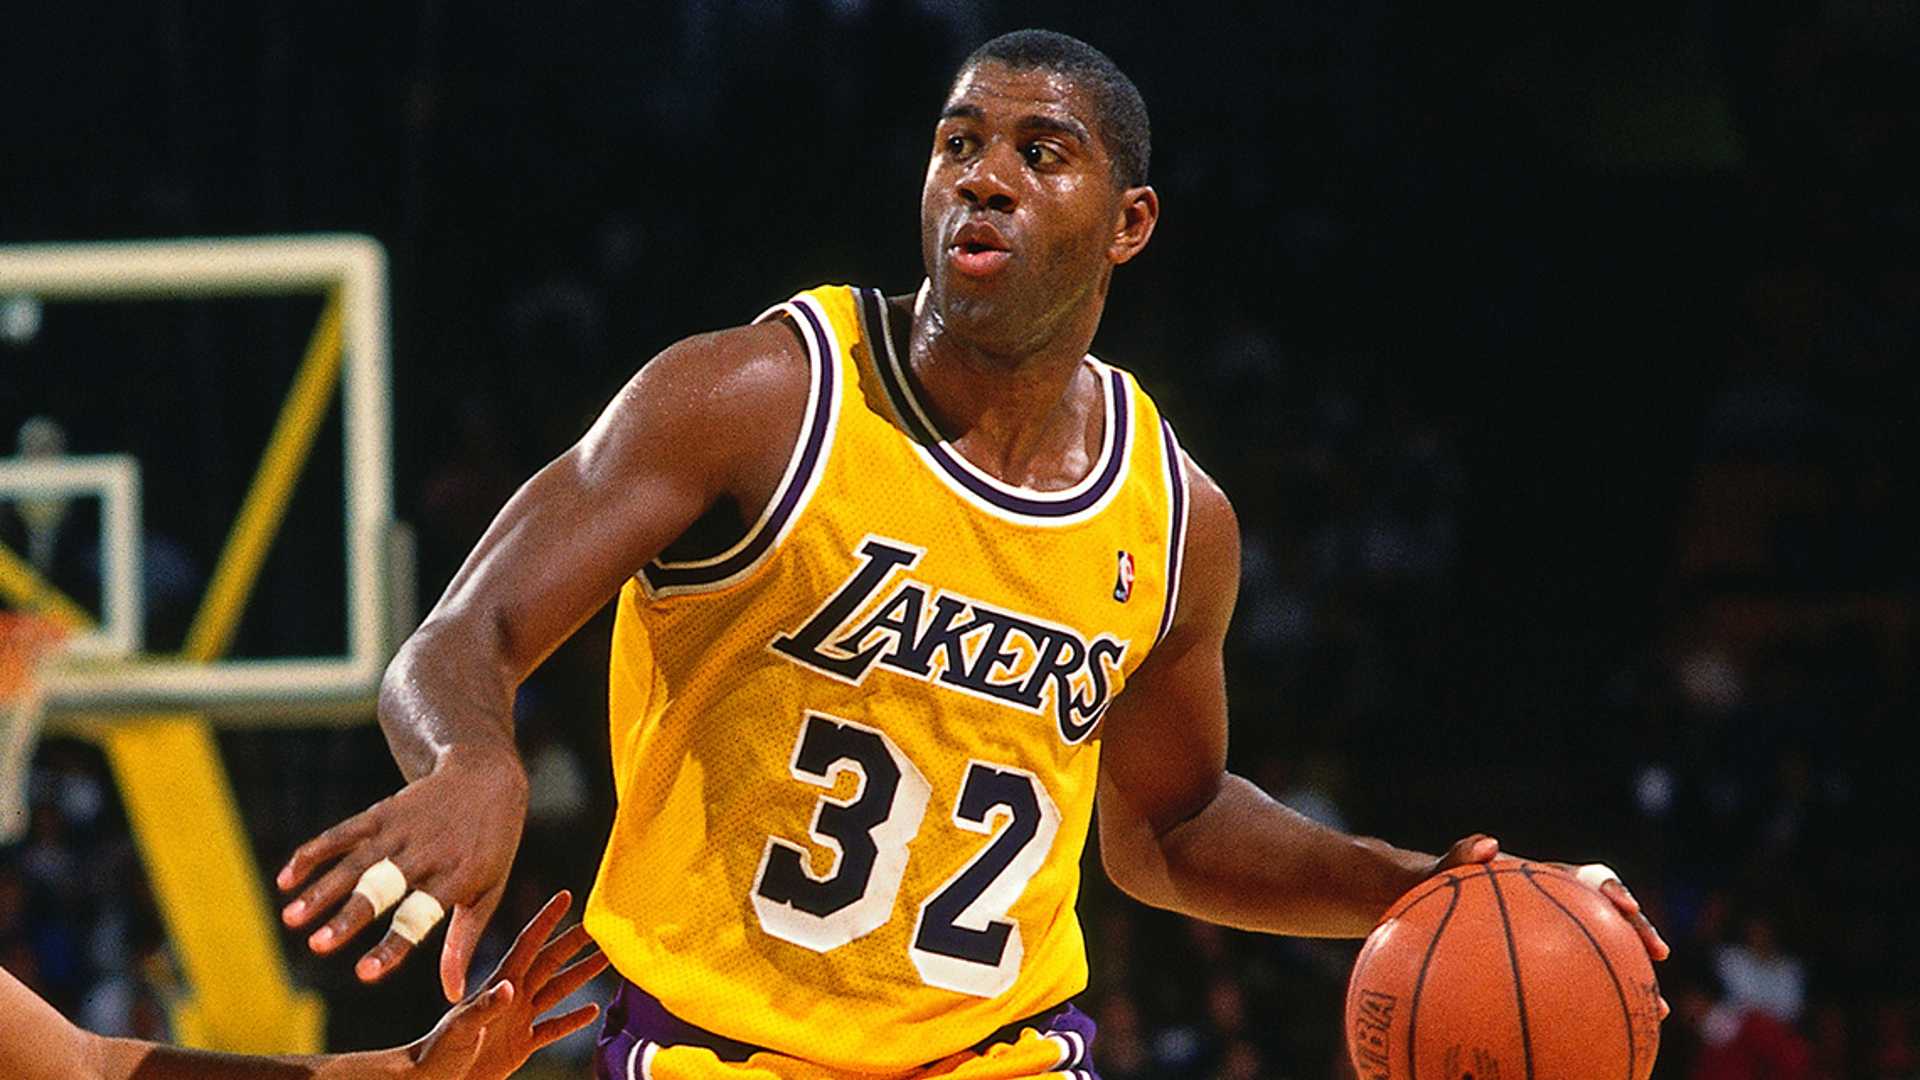 Magic Johnson has the most assists in the playoffs. (Image credits: twitter)